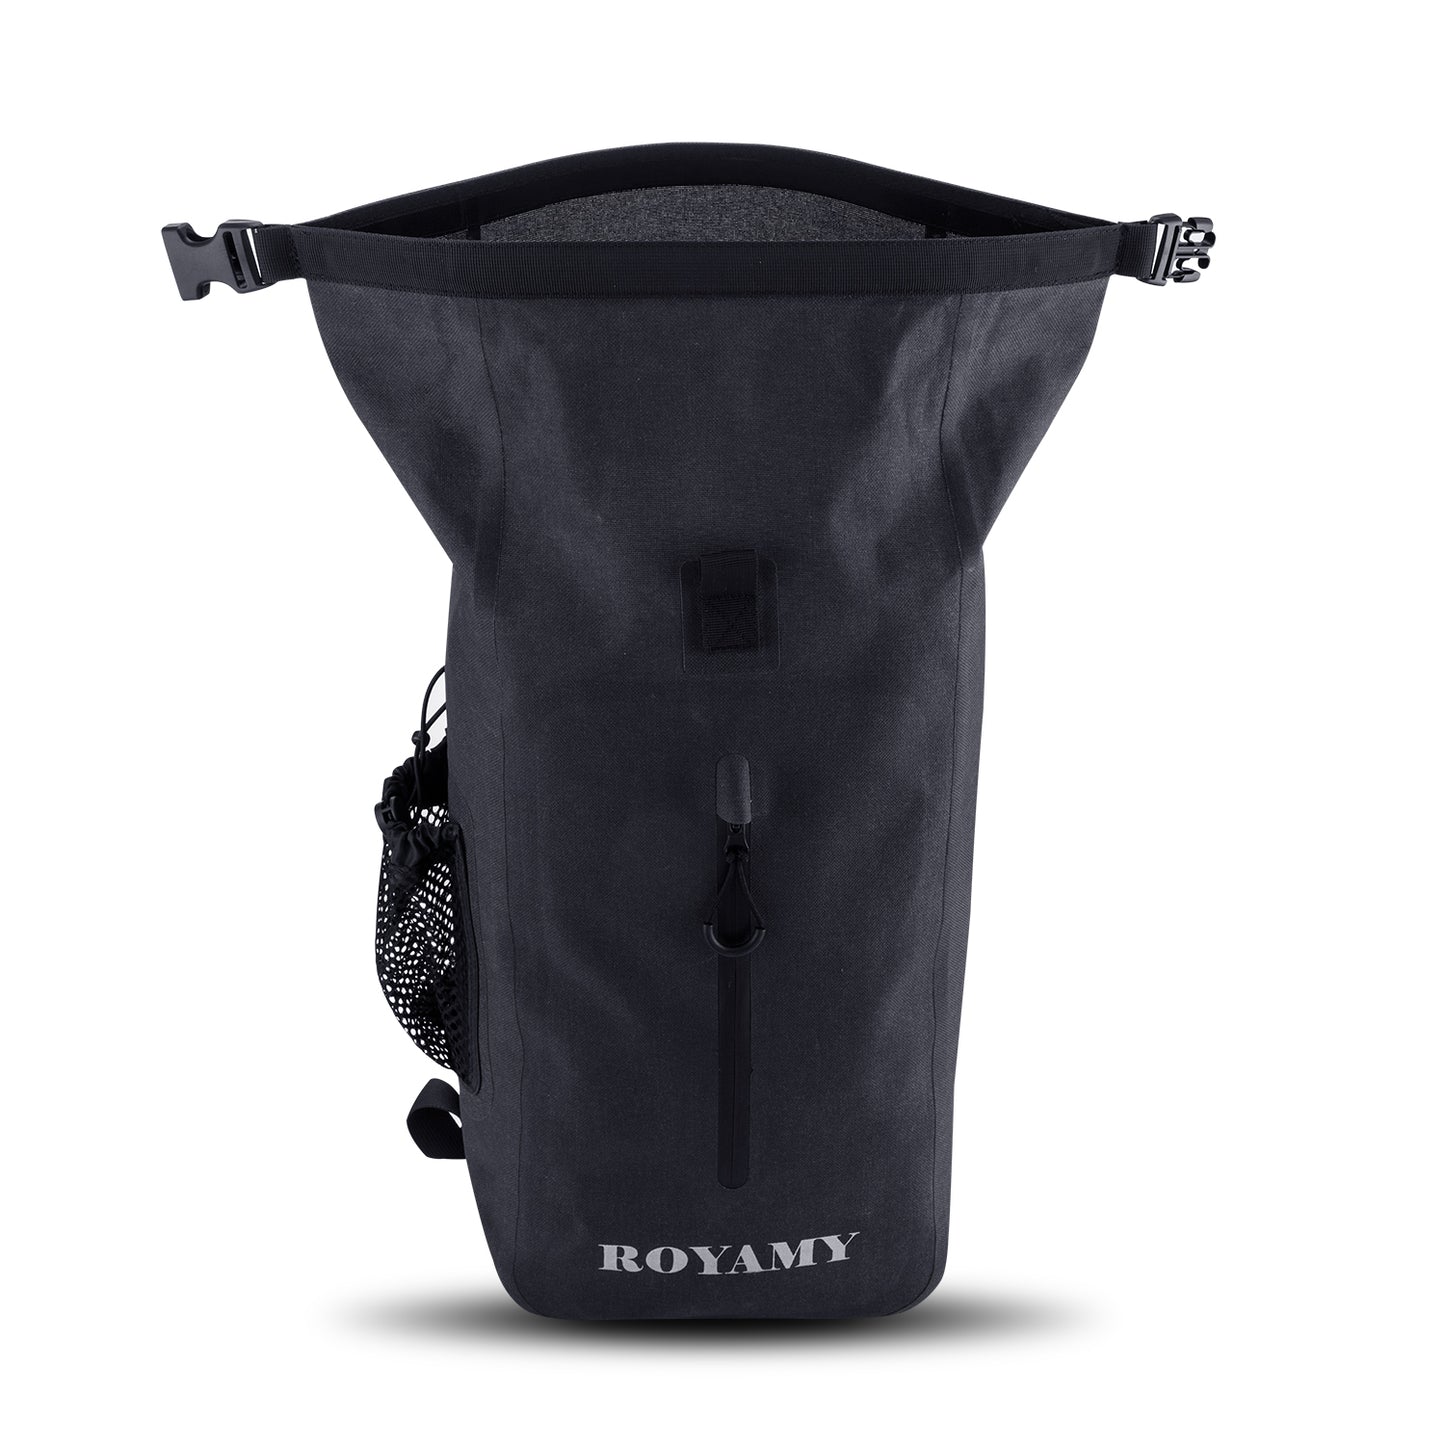 ROYAMY 25L Waterproof Dry Bag Backpack  600D TPU Fabrics with Removable 15’Laptop Sleeve(Black)